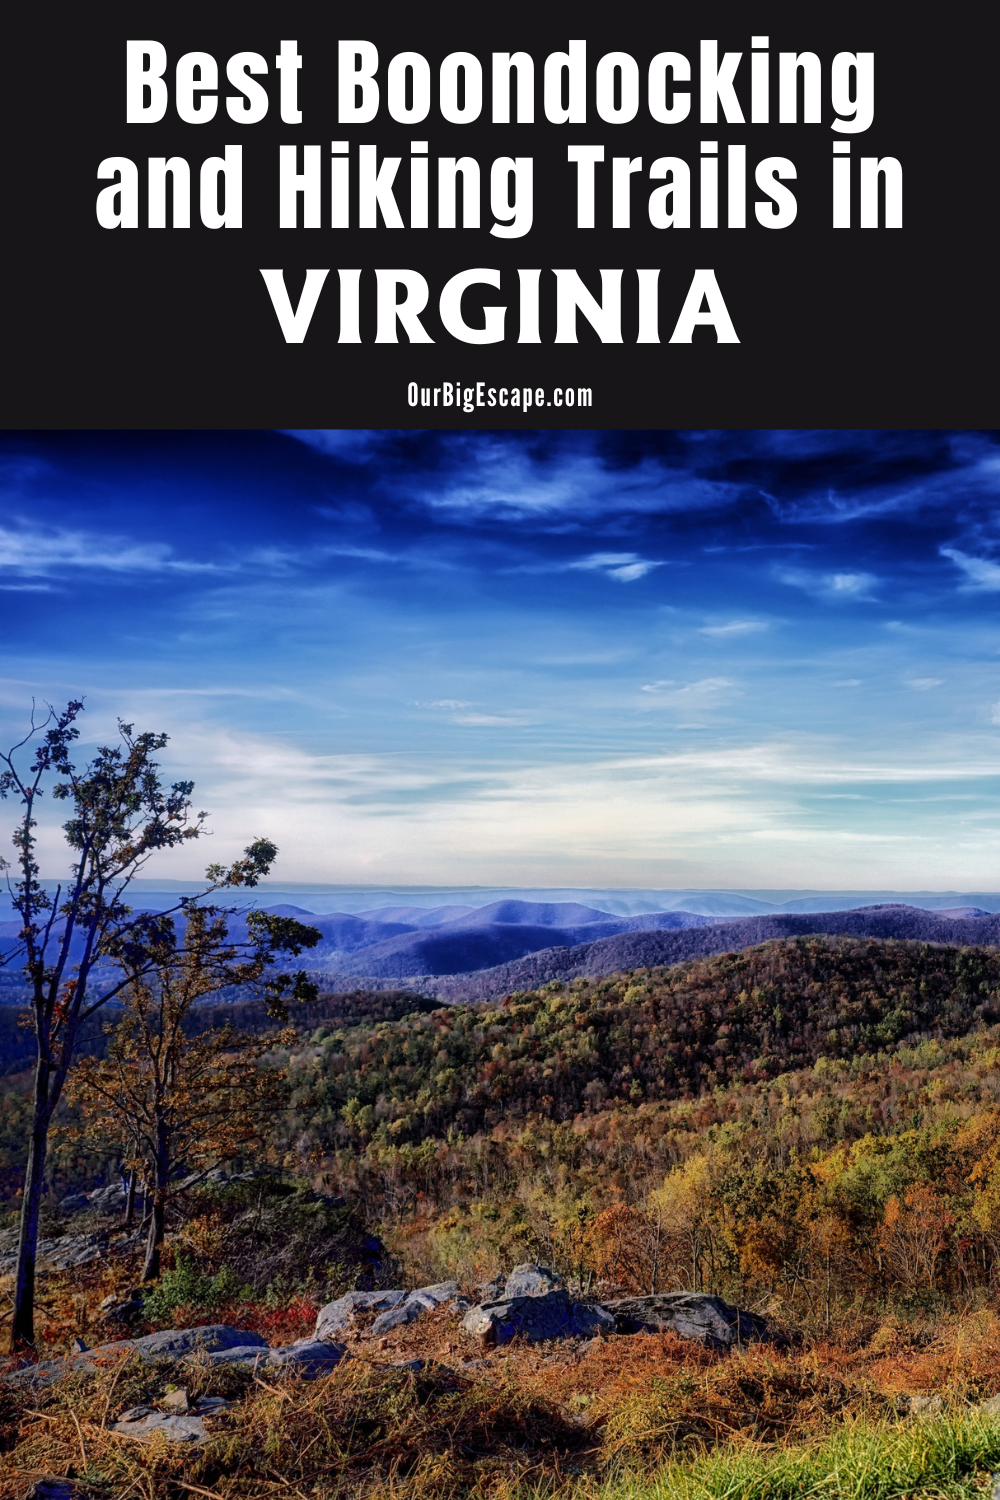 Best Boondocking and Hiking Trails in Virginia